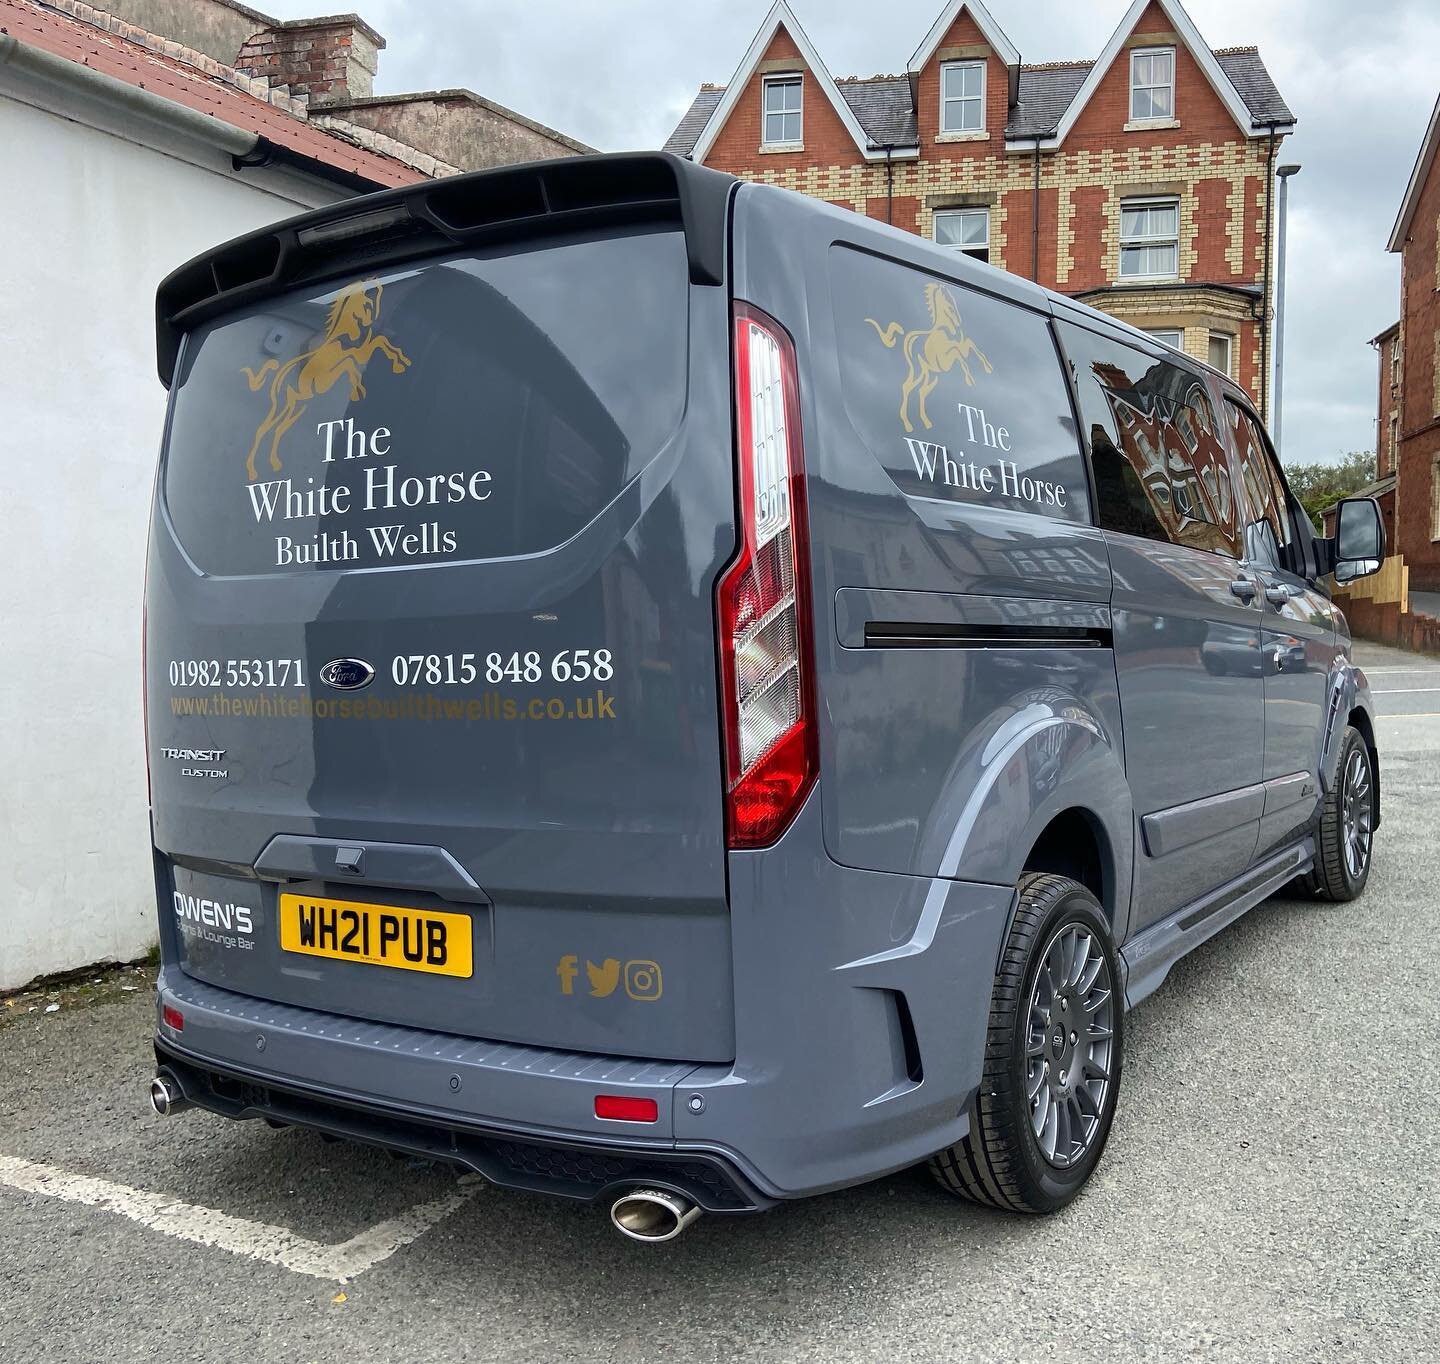 What a great canvas vehicle to sign write! Thanks @roryowen24 @ the @whitehorsebuilthwells for bringing her in for some tinting &amp; Sign writing!